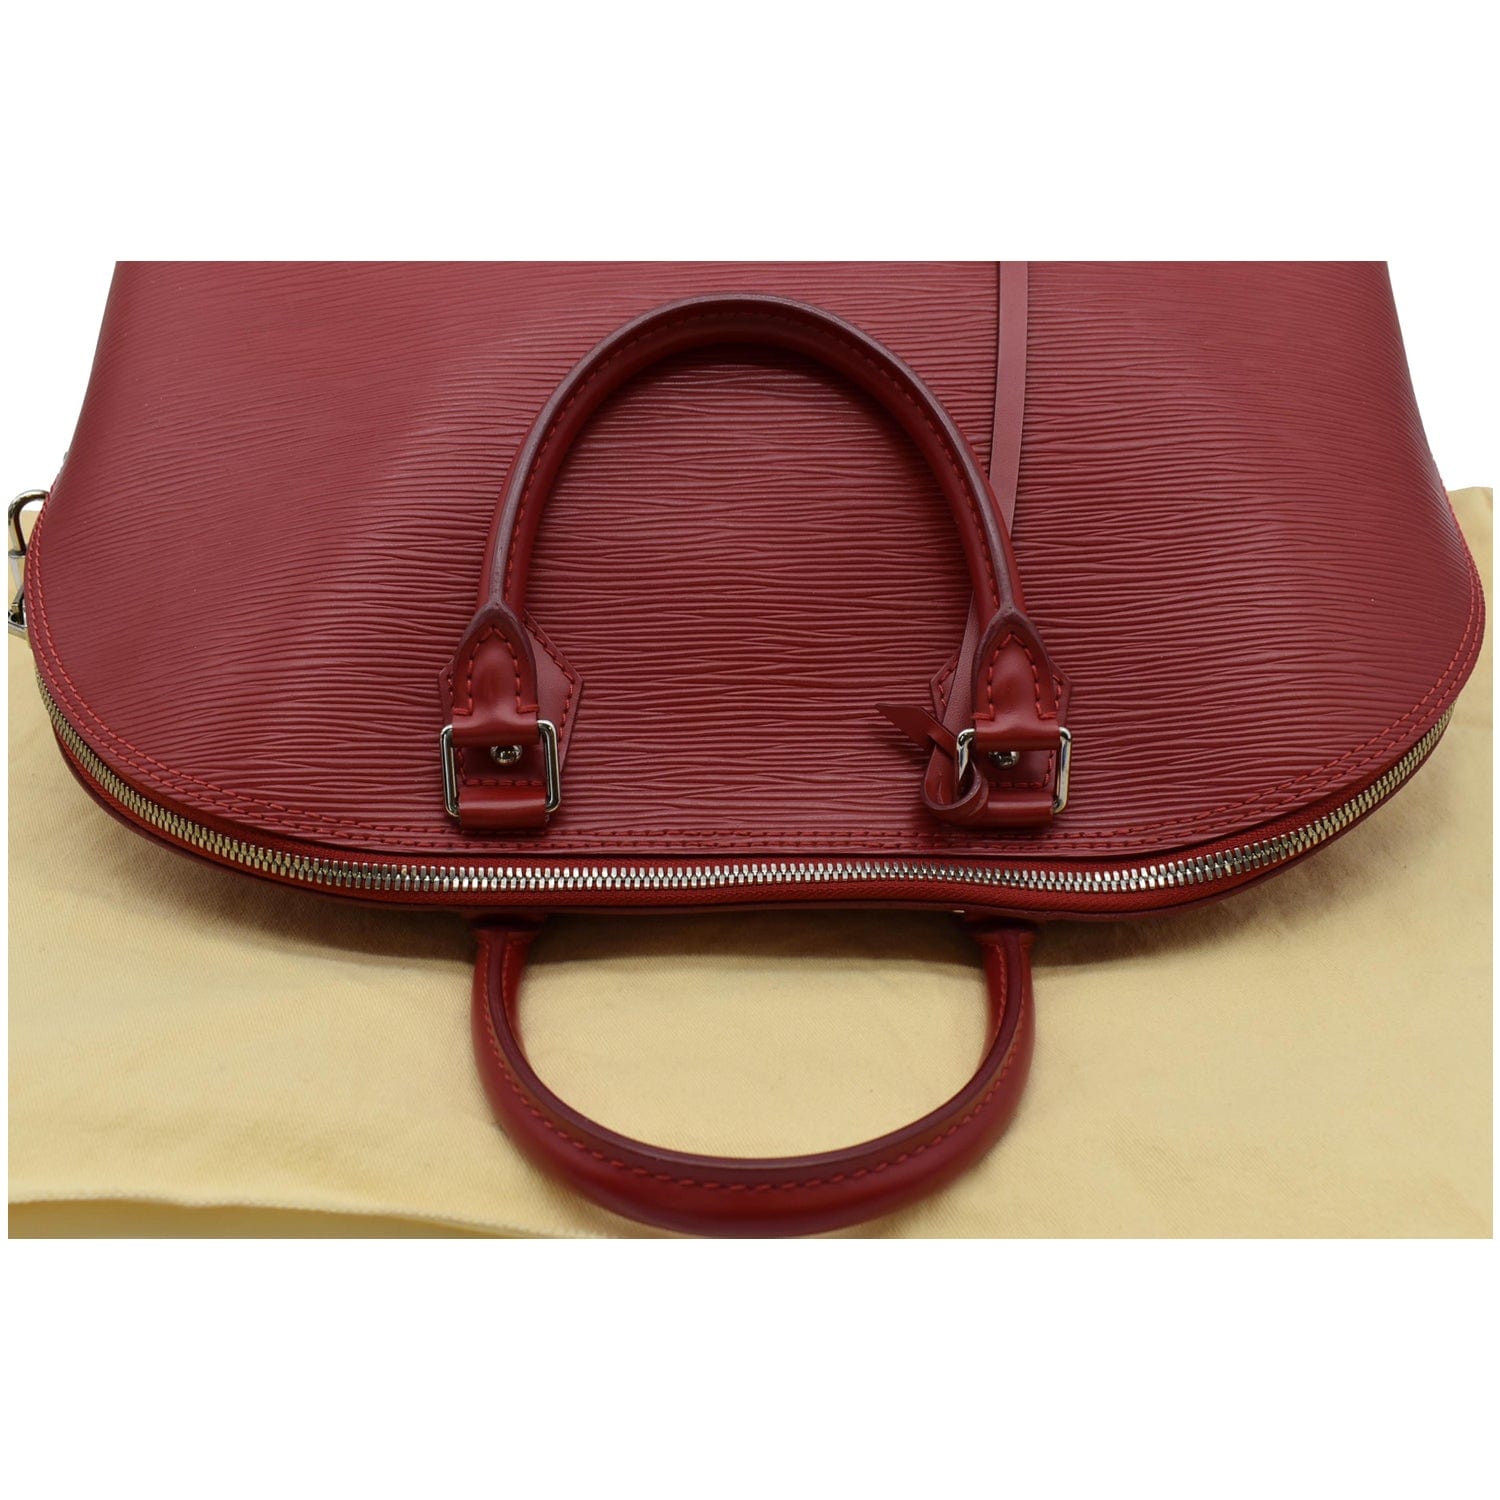 Alma LOUIS VUITTON leather red painted monogram GM bag - VALOIS